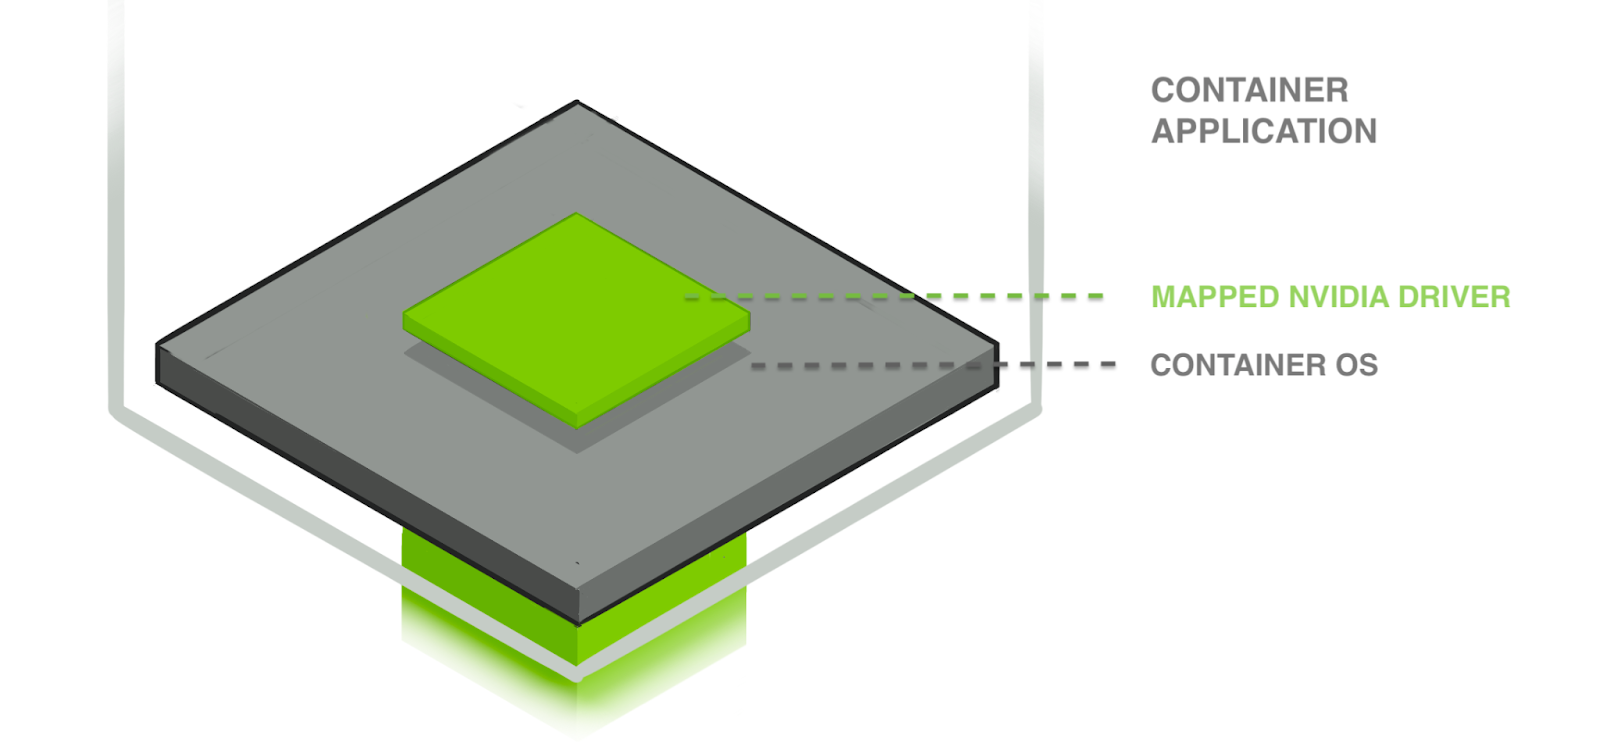 Illustration of the Container Application. This has a mapped Nvidia driver on the container's OS